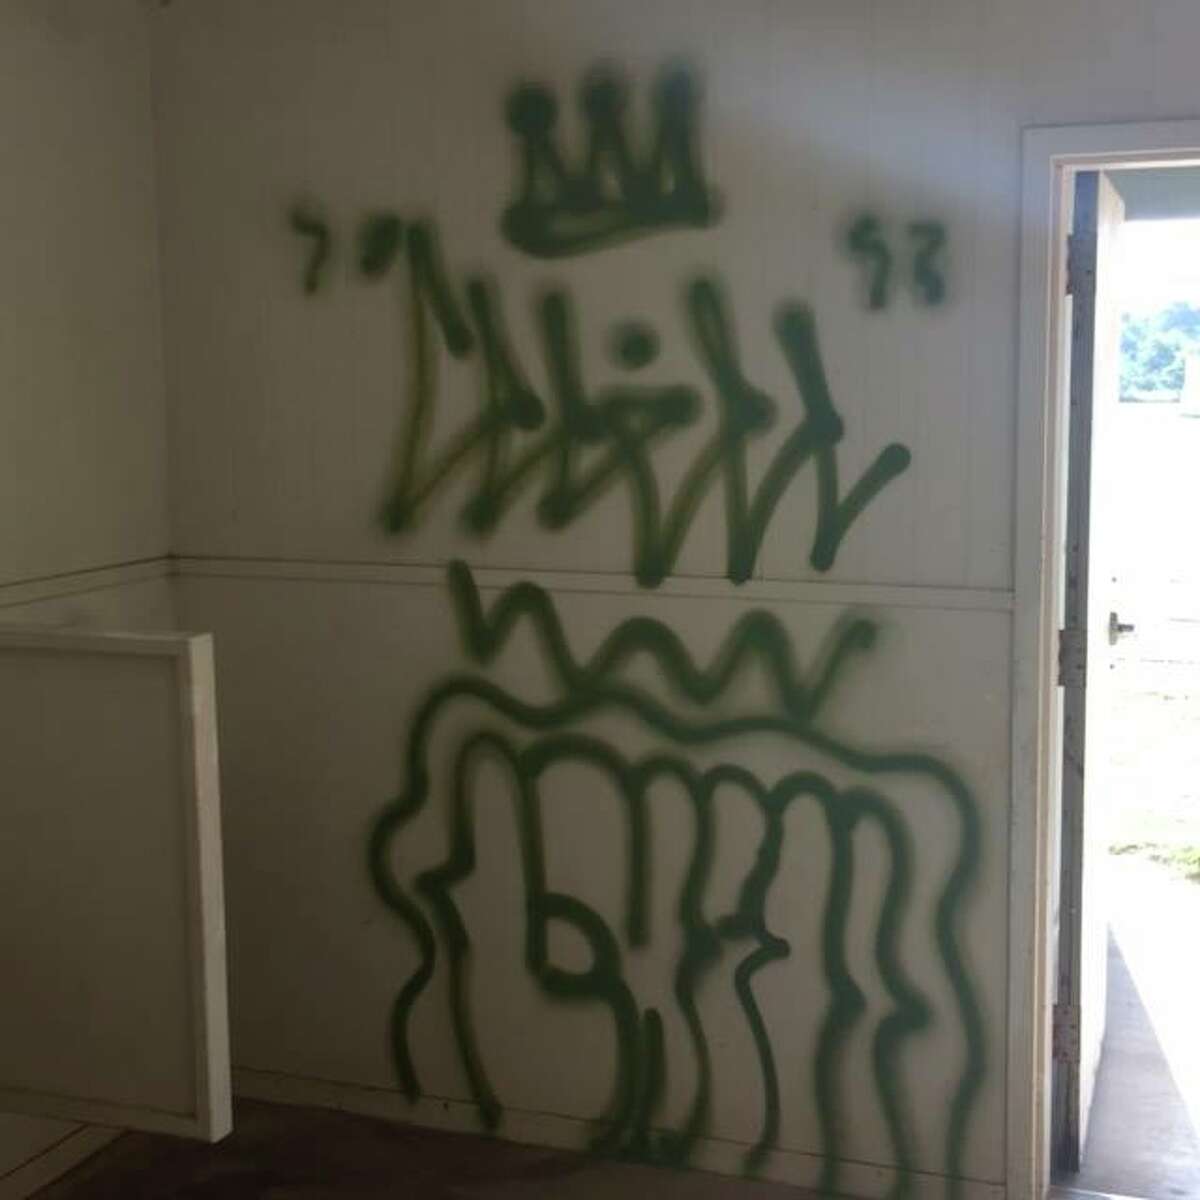 Boerne Police took to social media in the hopes of finding the person or people responsible for graffiti painted around town.